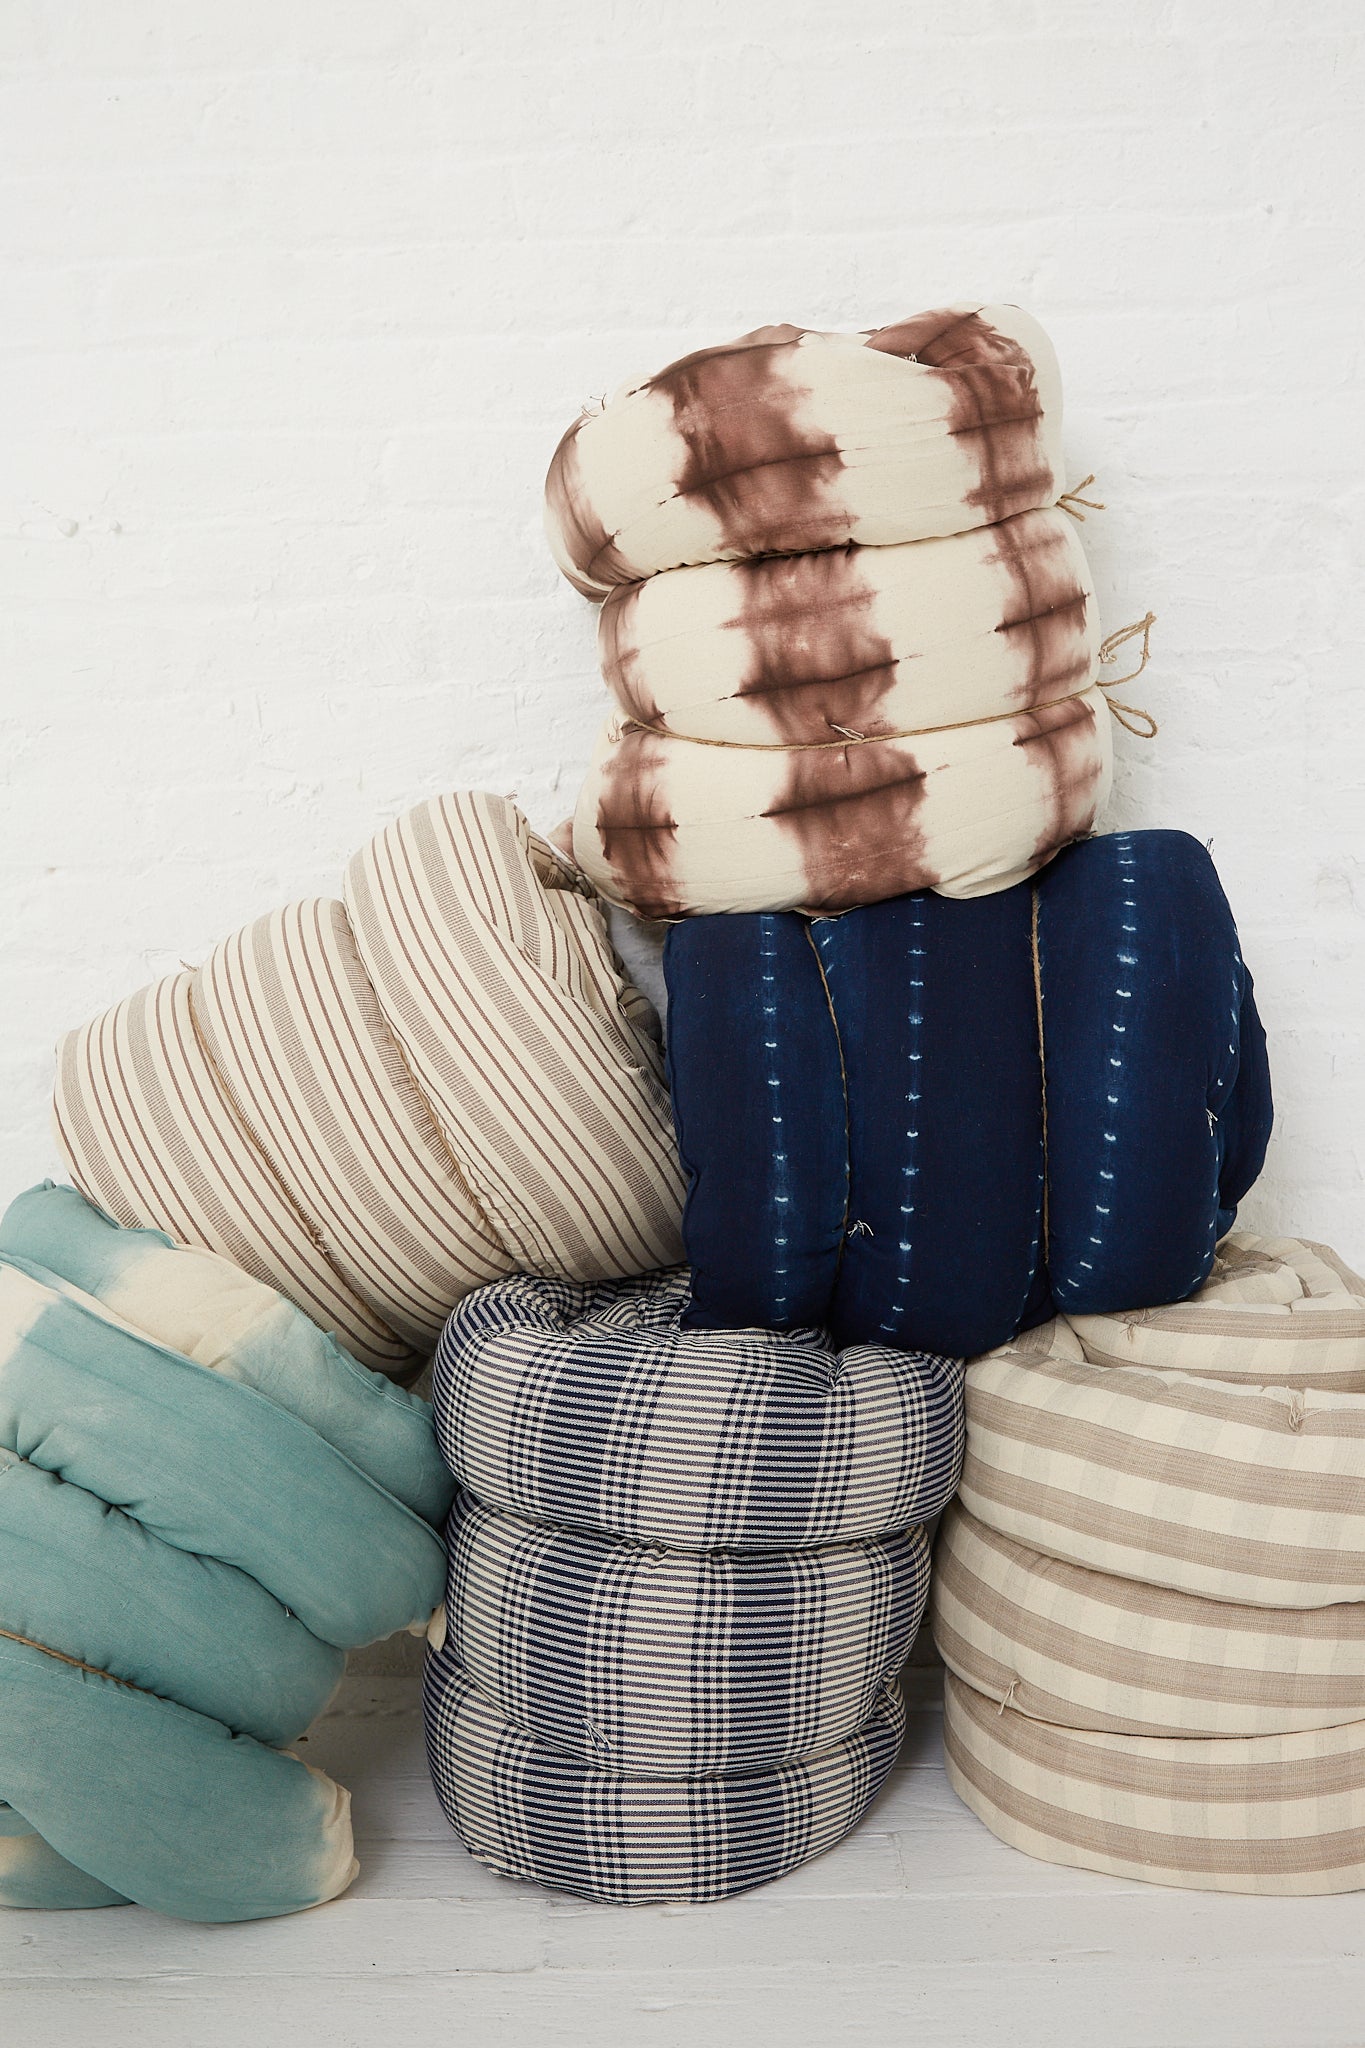 A stack of Tensira Tufted Overlay Mattresses in Dark Indigo Tie Dye piled up on top of each other.